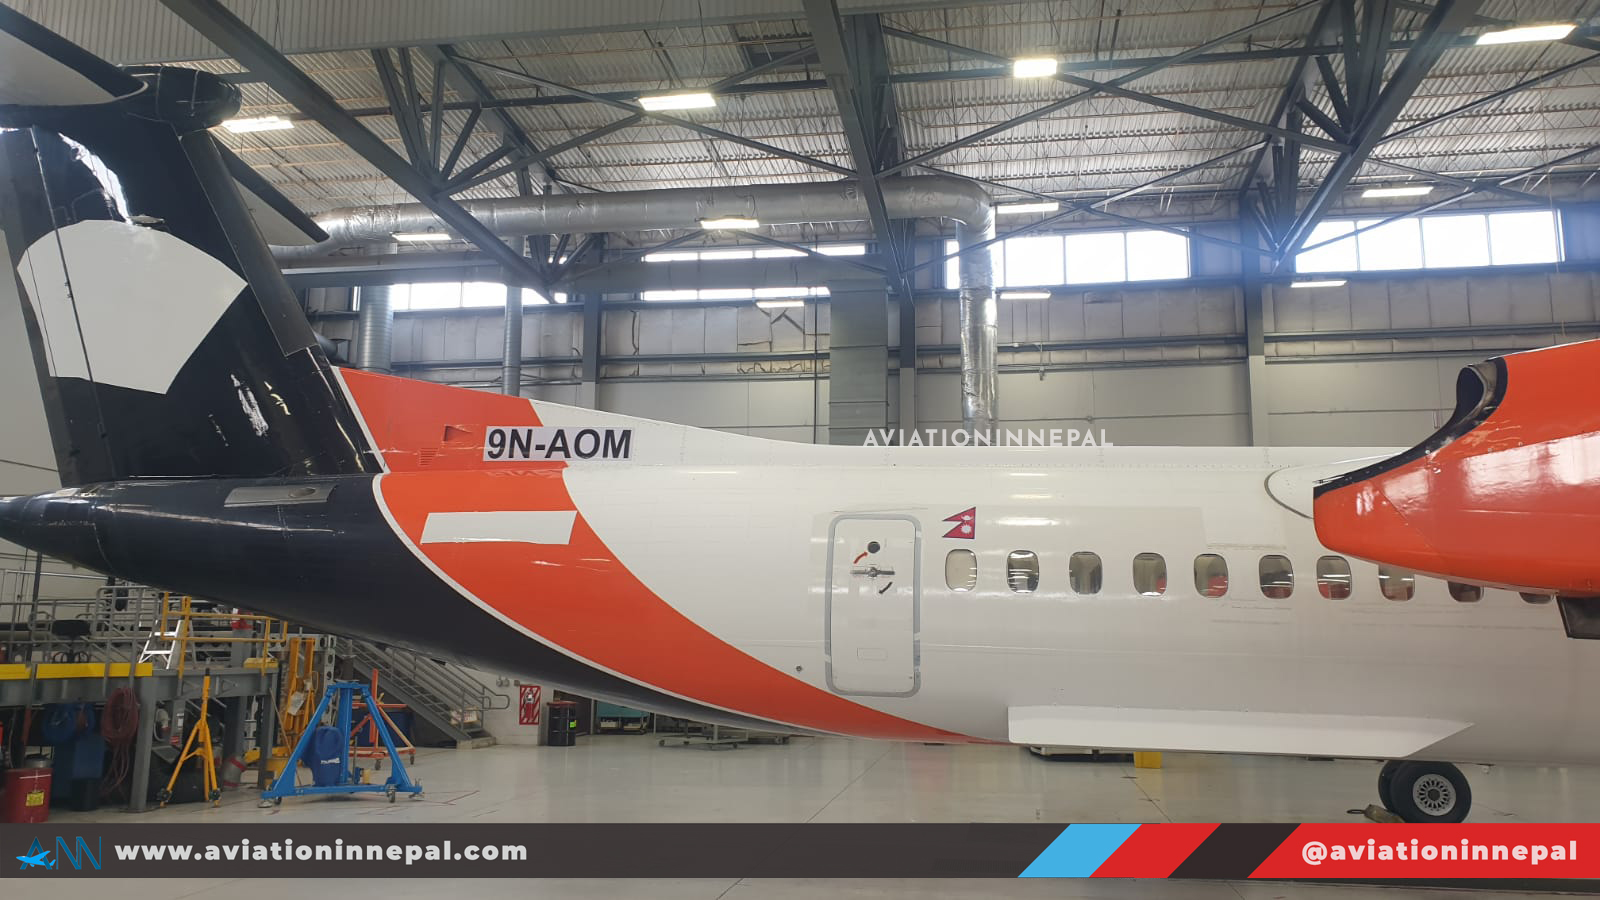 Shree Airlines New Dash 8 aircraft 9N-AOM - Aviation in Nepal (Copyright Reserved)